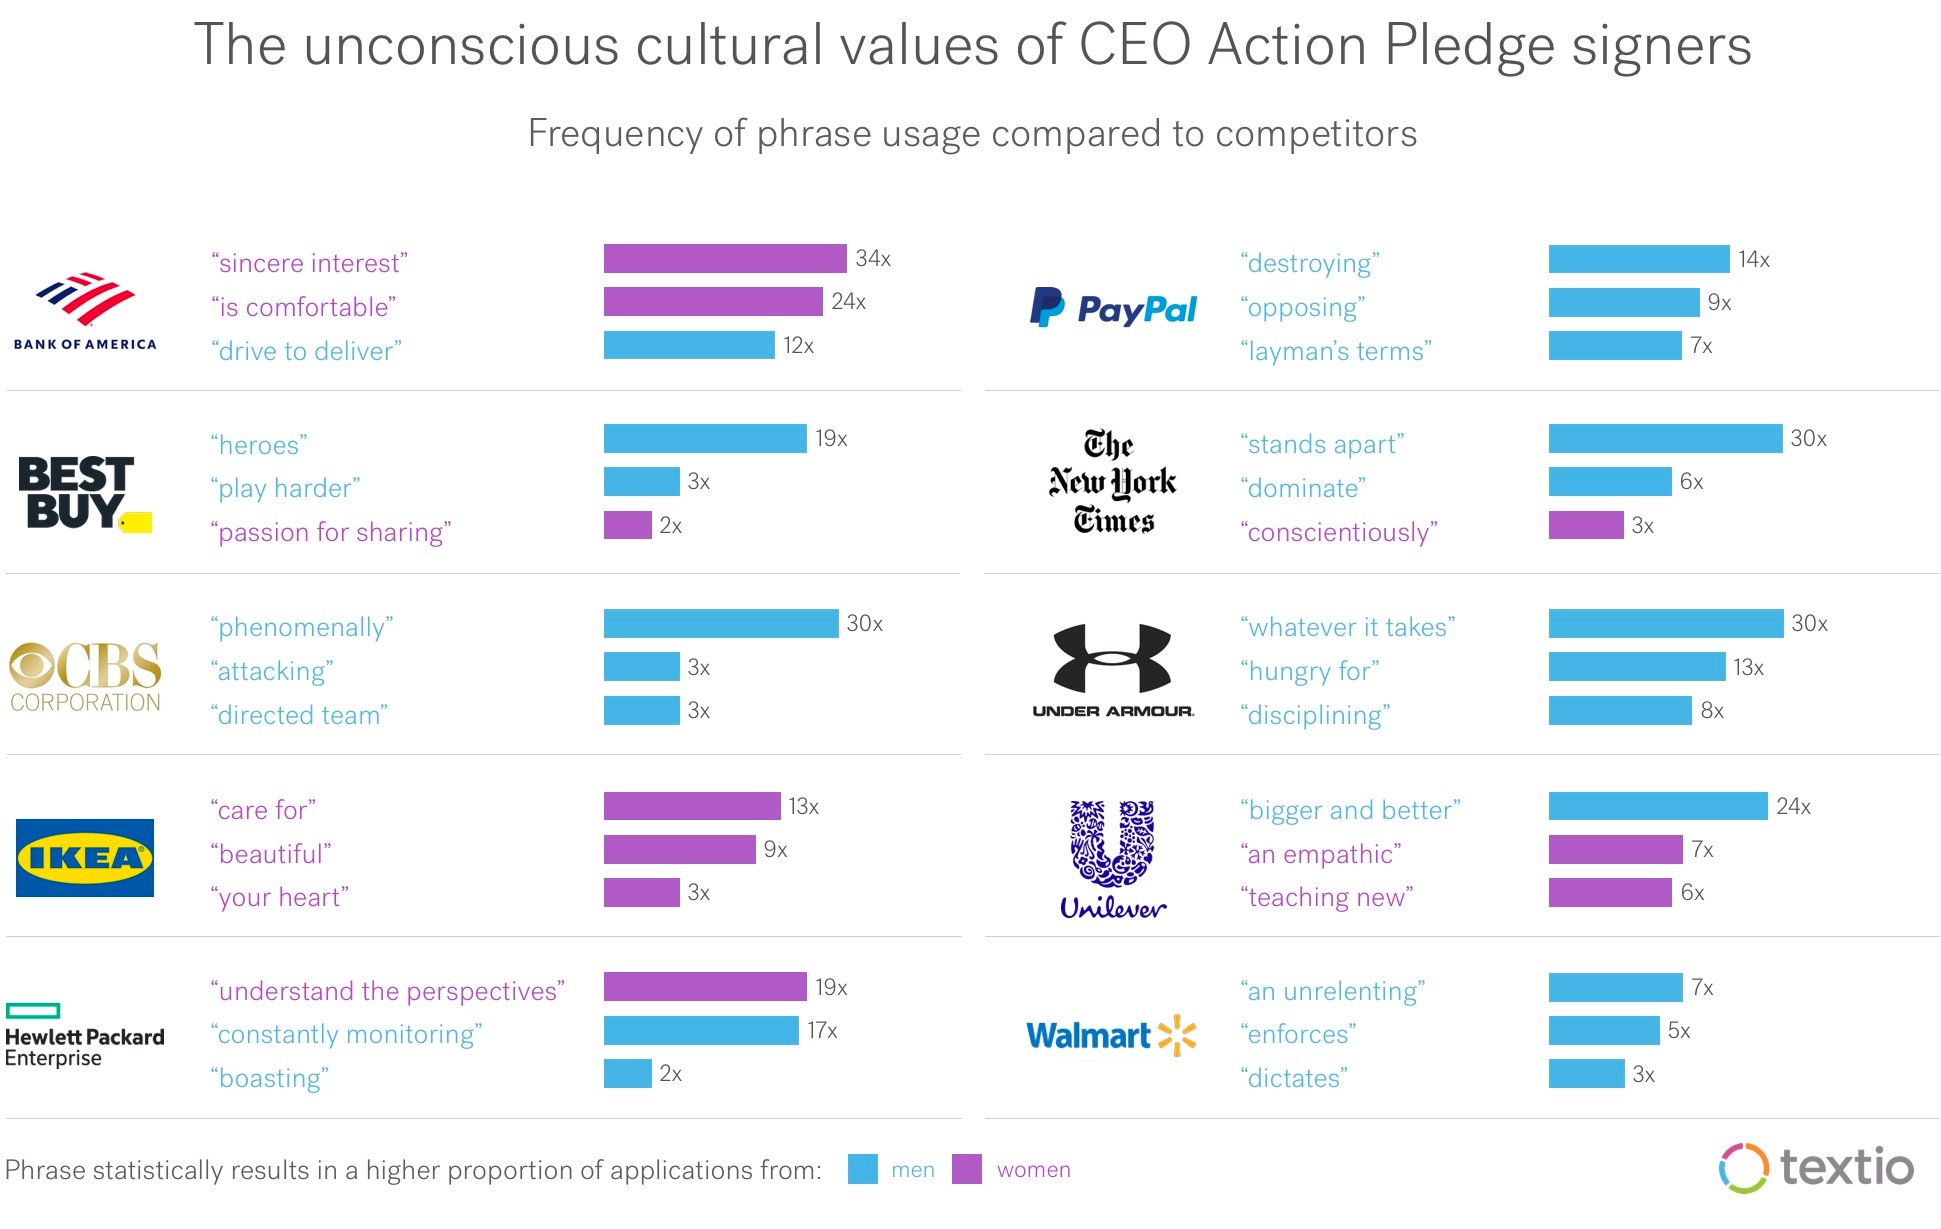 The unconscious cultural values of CEO action pledge signers. 10 different organizations distinctive language compared to the next closest competitor